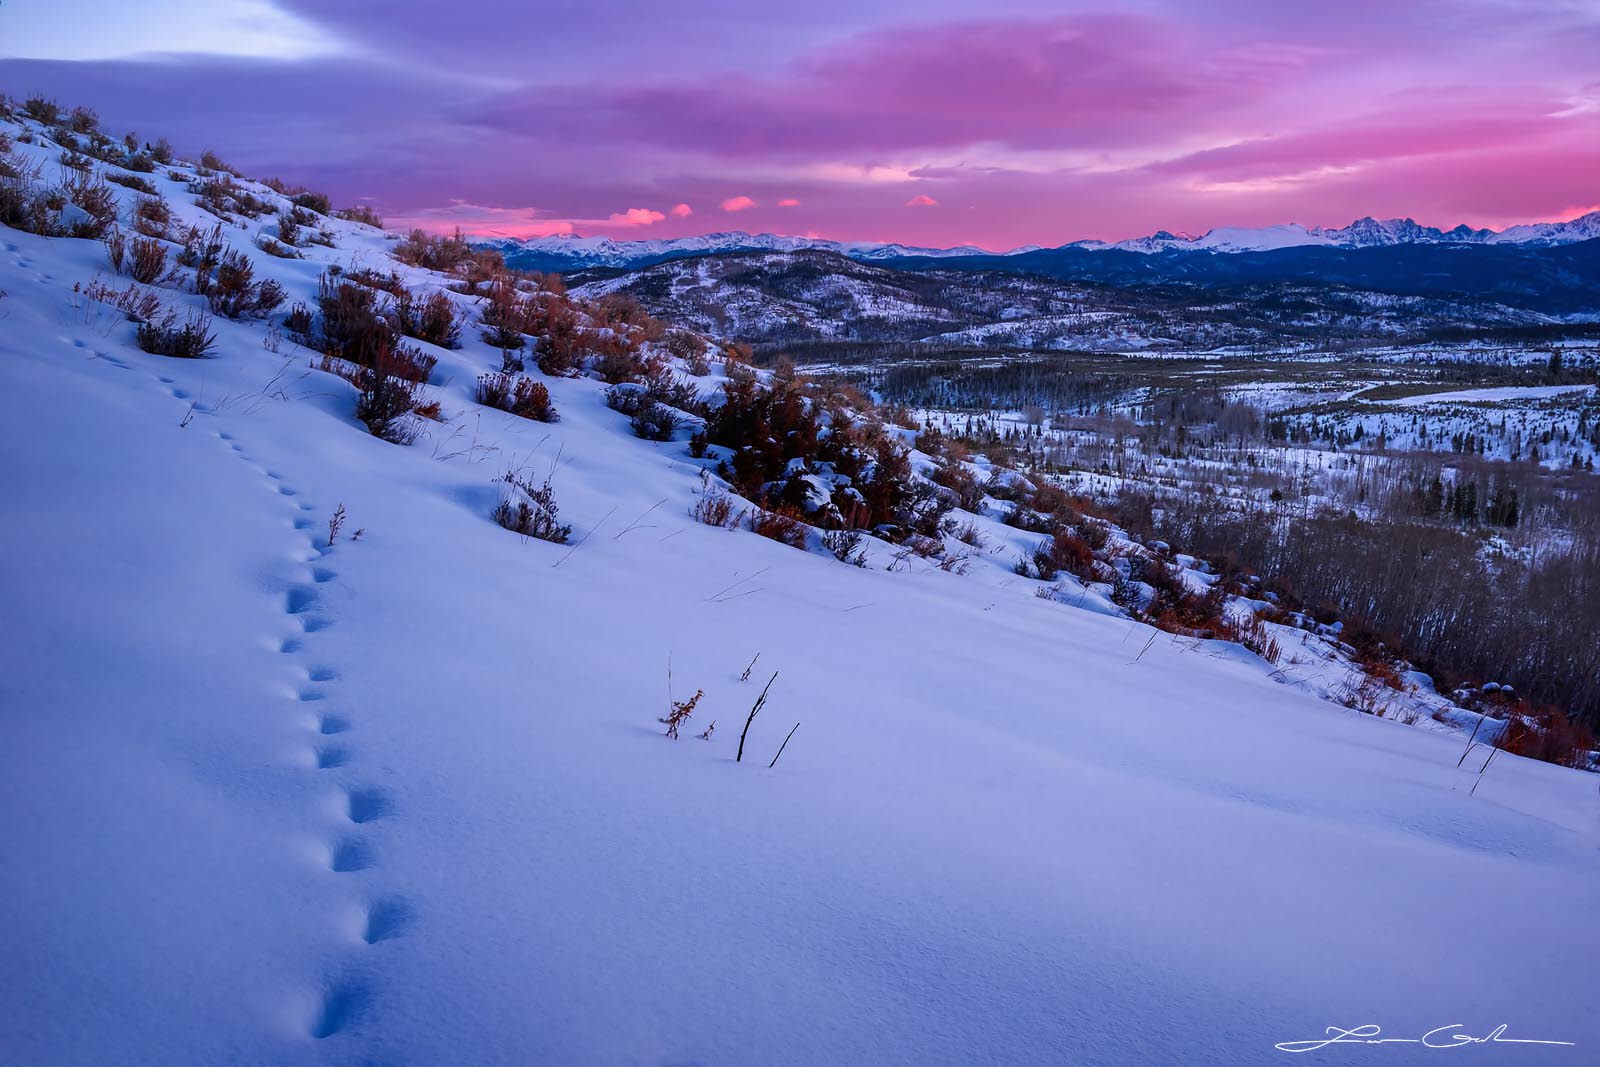 Wildlife tracks in snow with mountains and pink sunrise clouds in the background